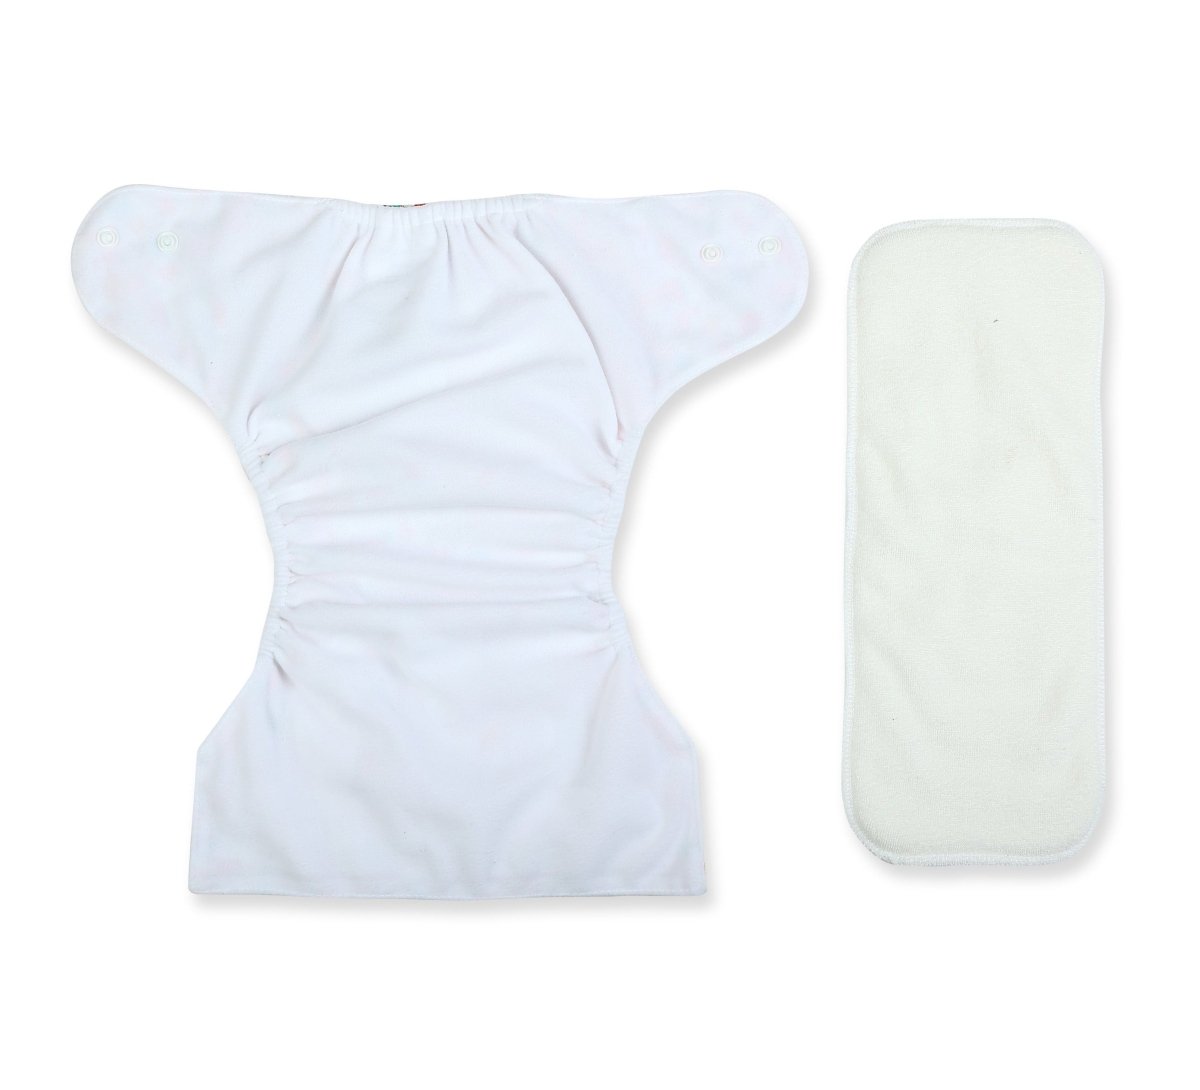 Blooming- Re-Usable Cloth Diaper - CD-RS-FL-3-3